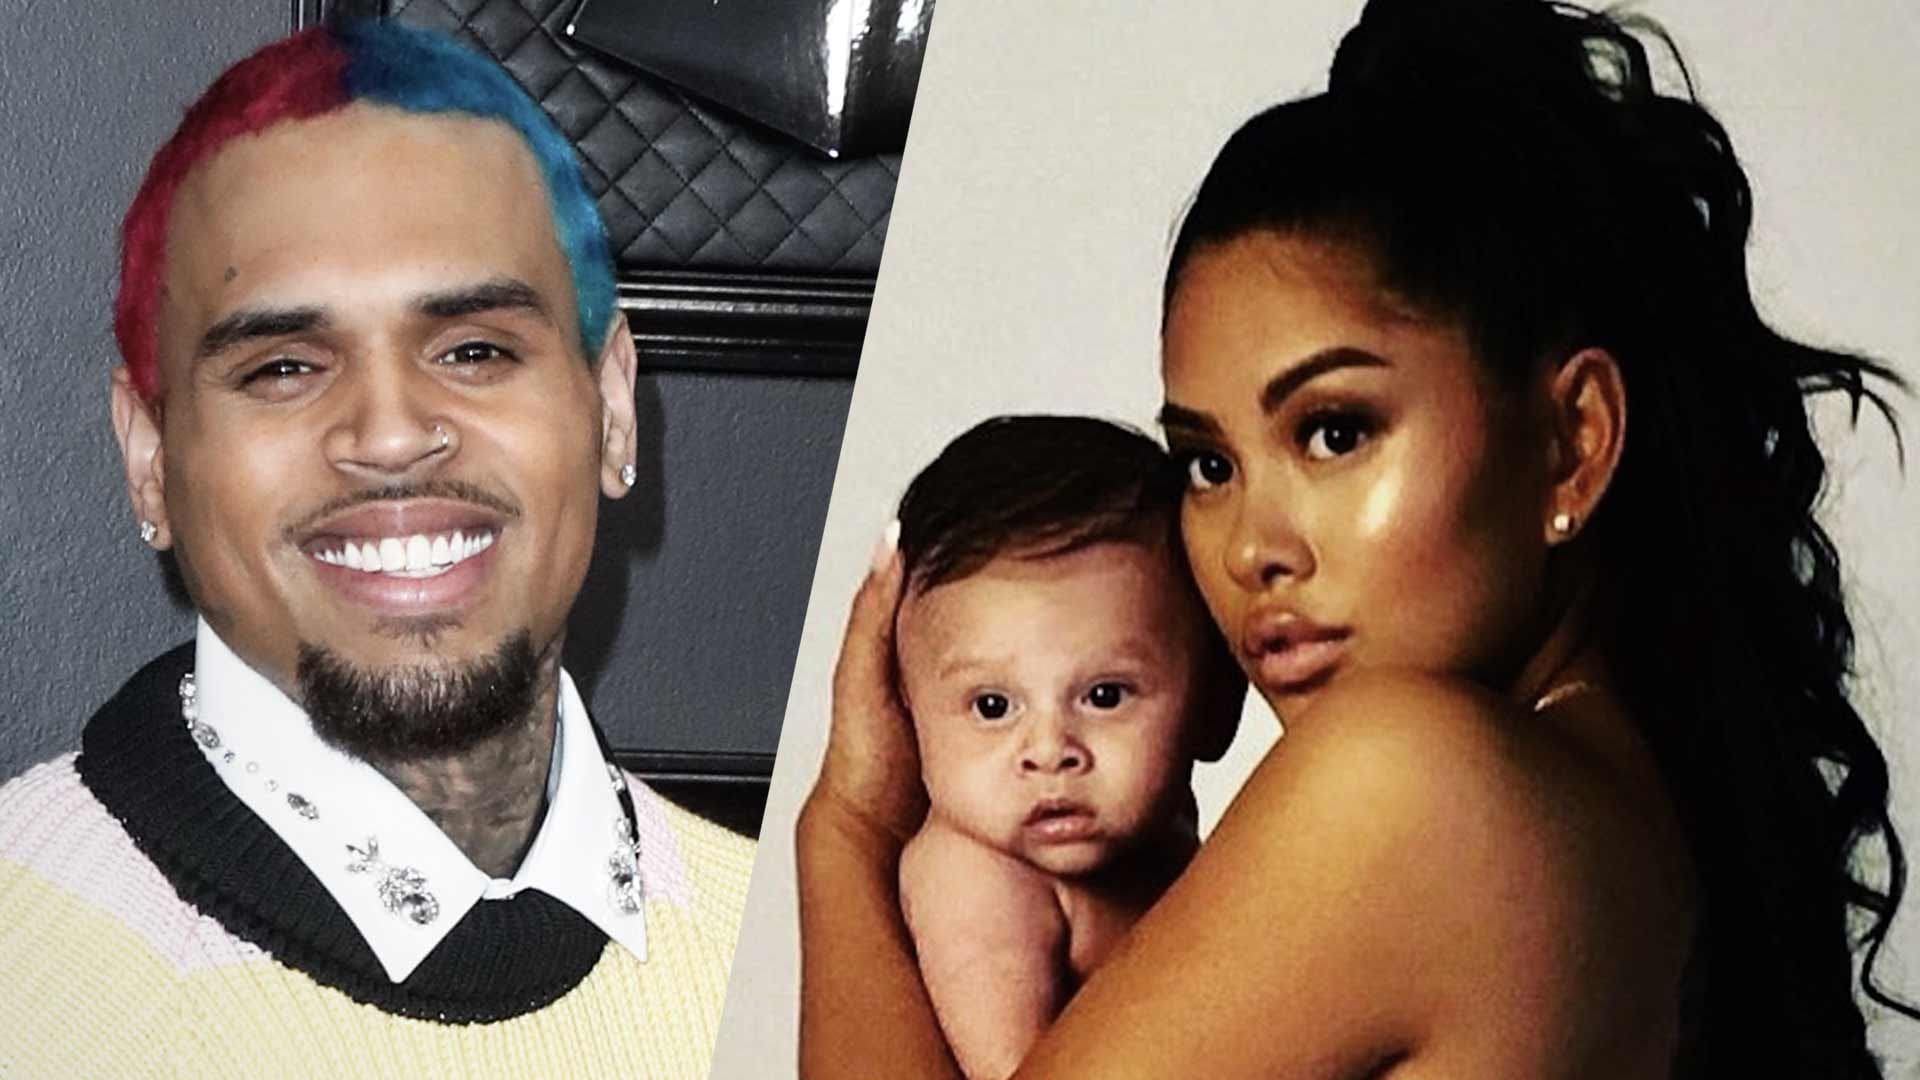 ”chris-brown-gushes-over-ammika-harris-once-again-after-she-shares-sultry-bathing-suit-pic”